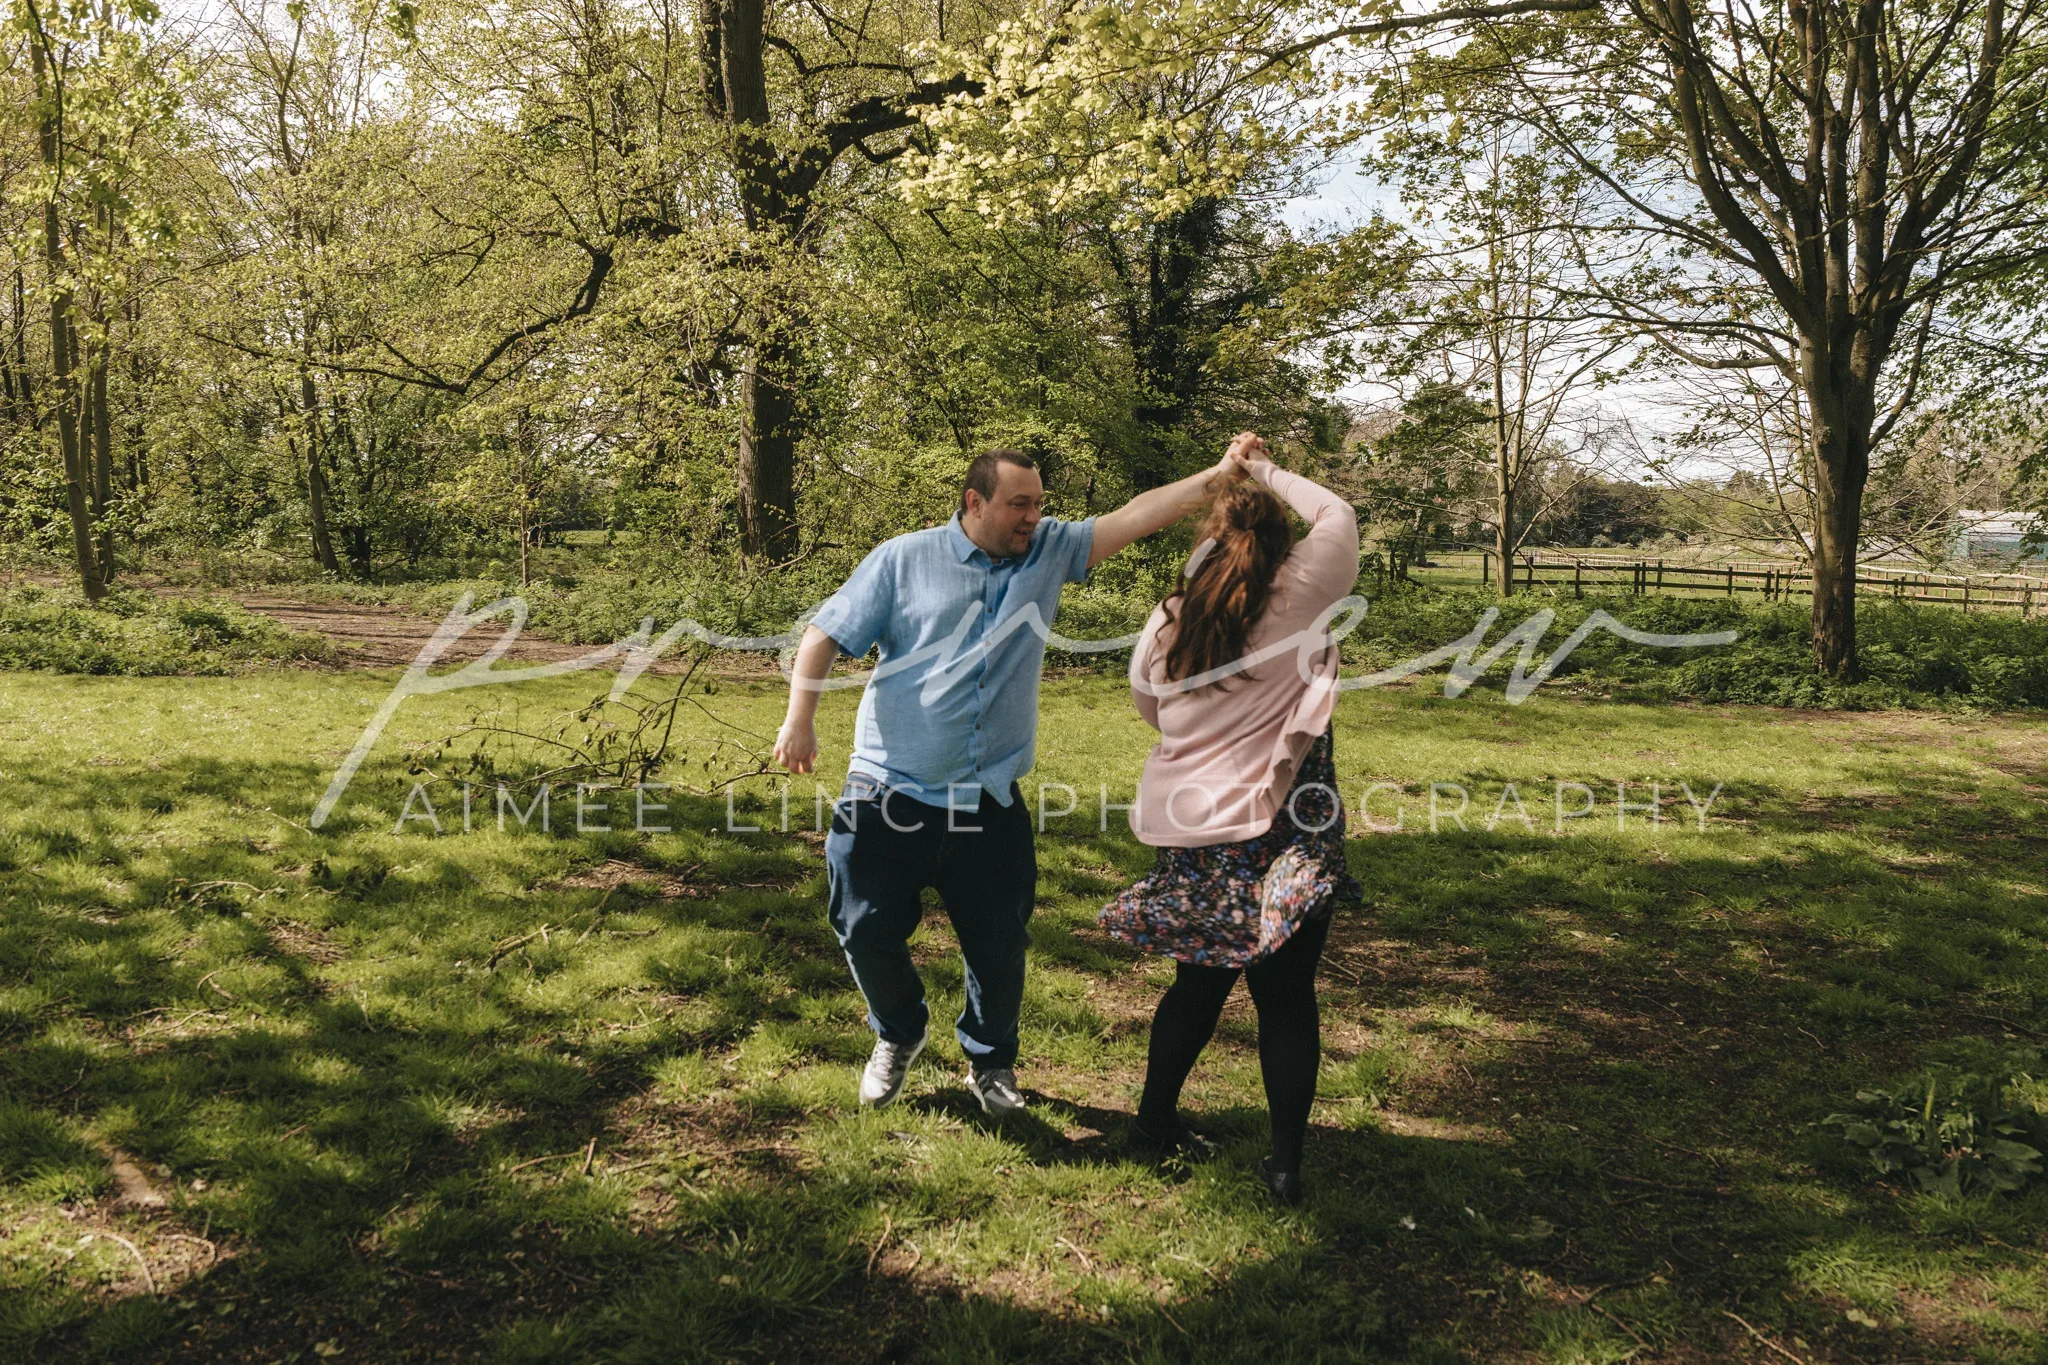 A man and a woman dance joyfully in a lush park under a canopy of trees, with sunlight filtering through the leaves. Samantha flicks her hair, and both are smiling, captured mid-twirl